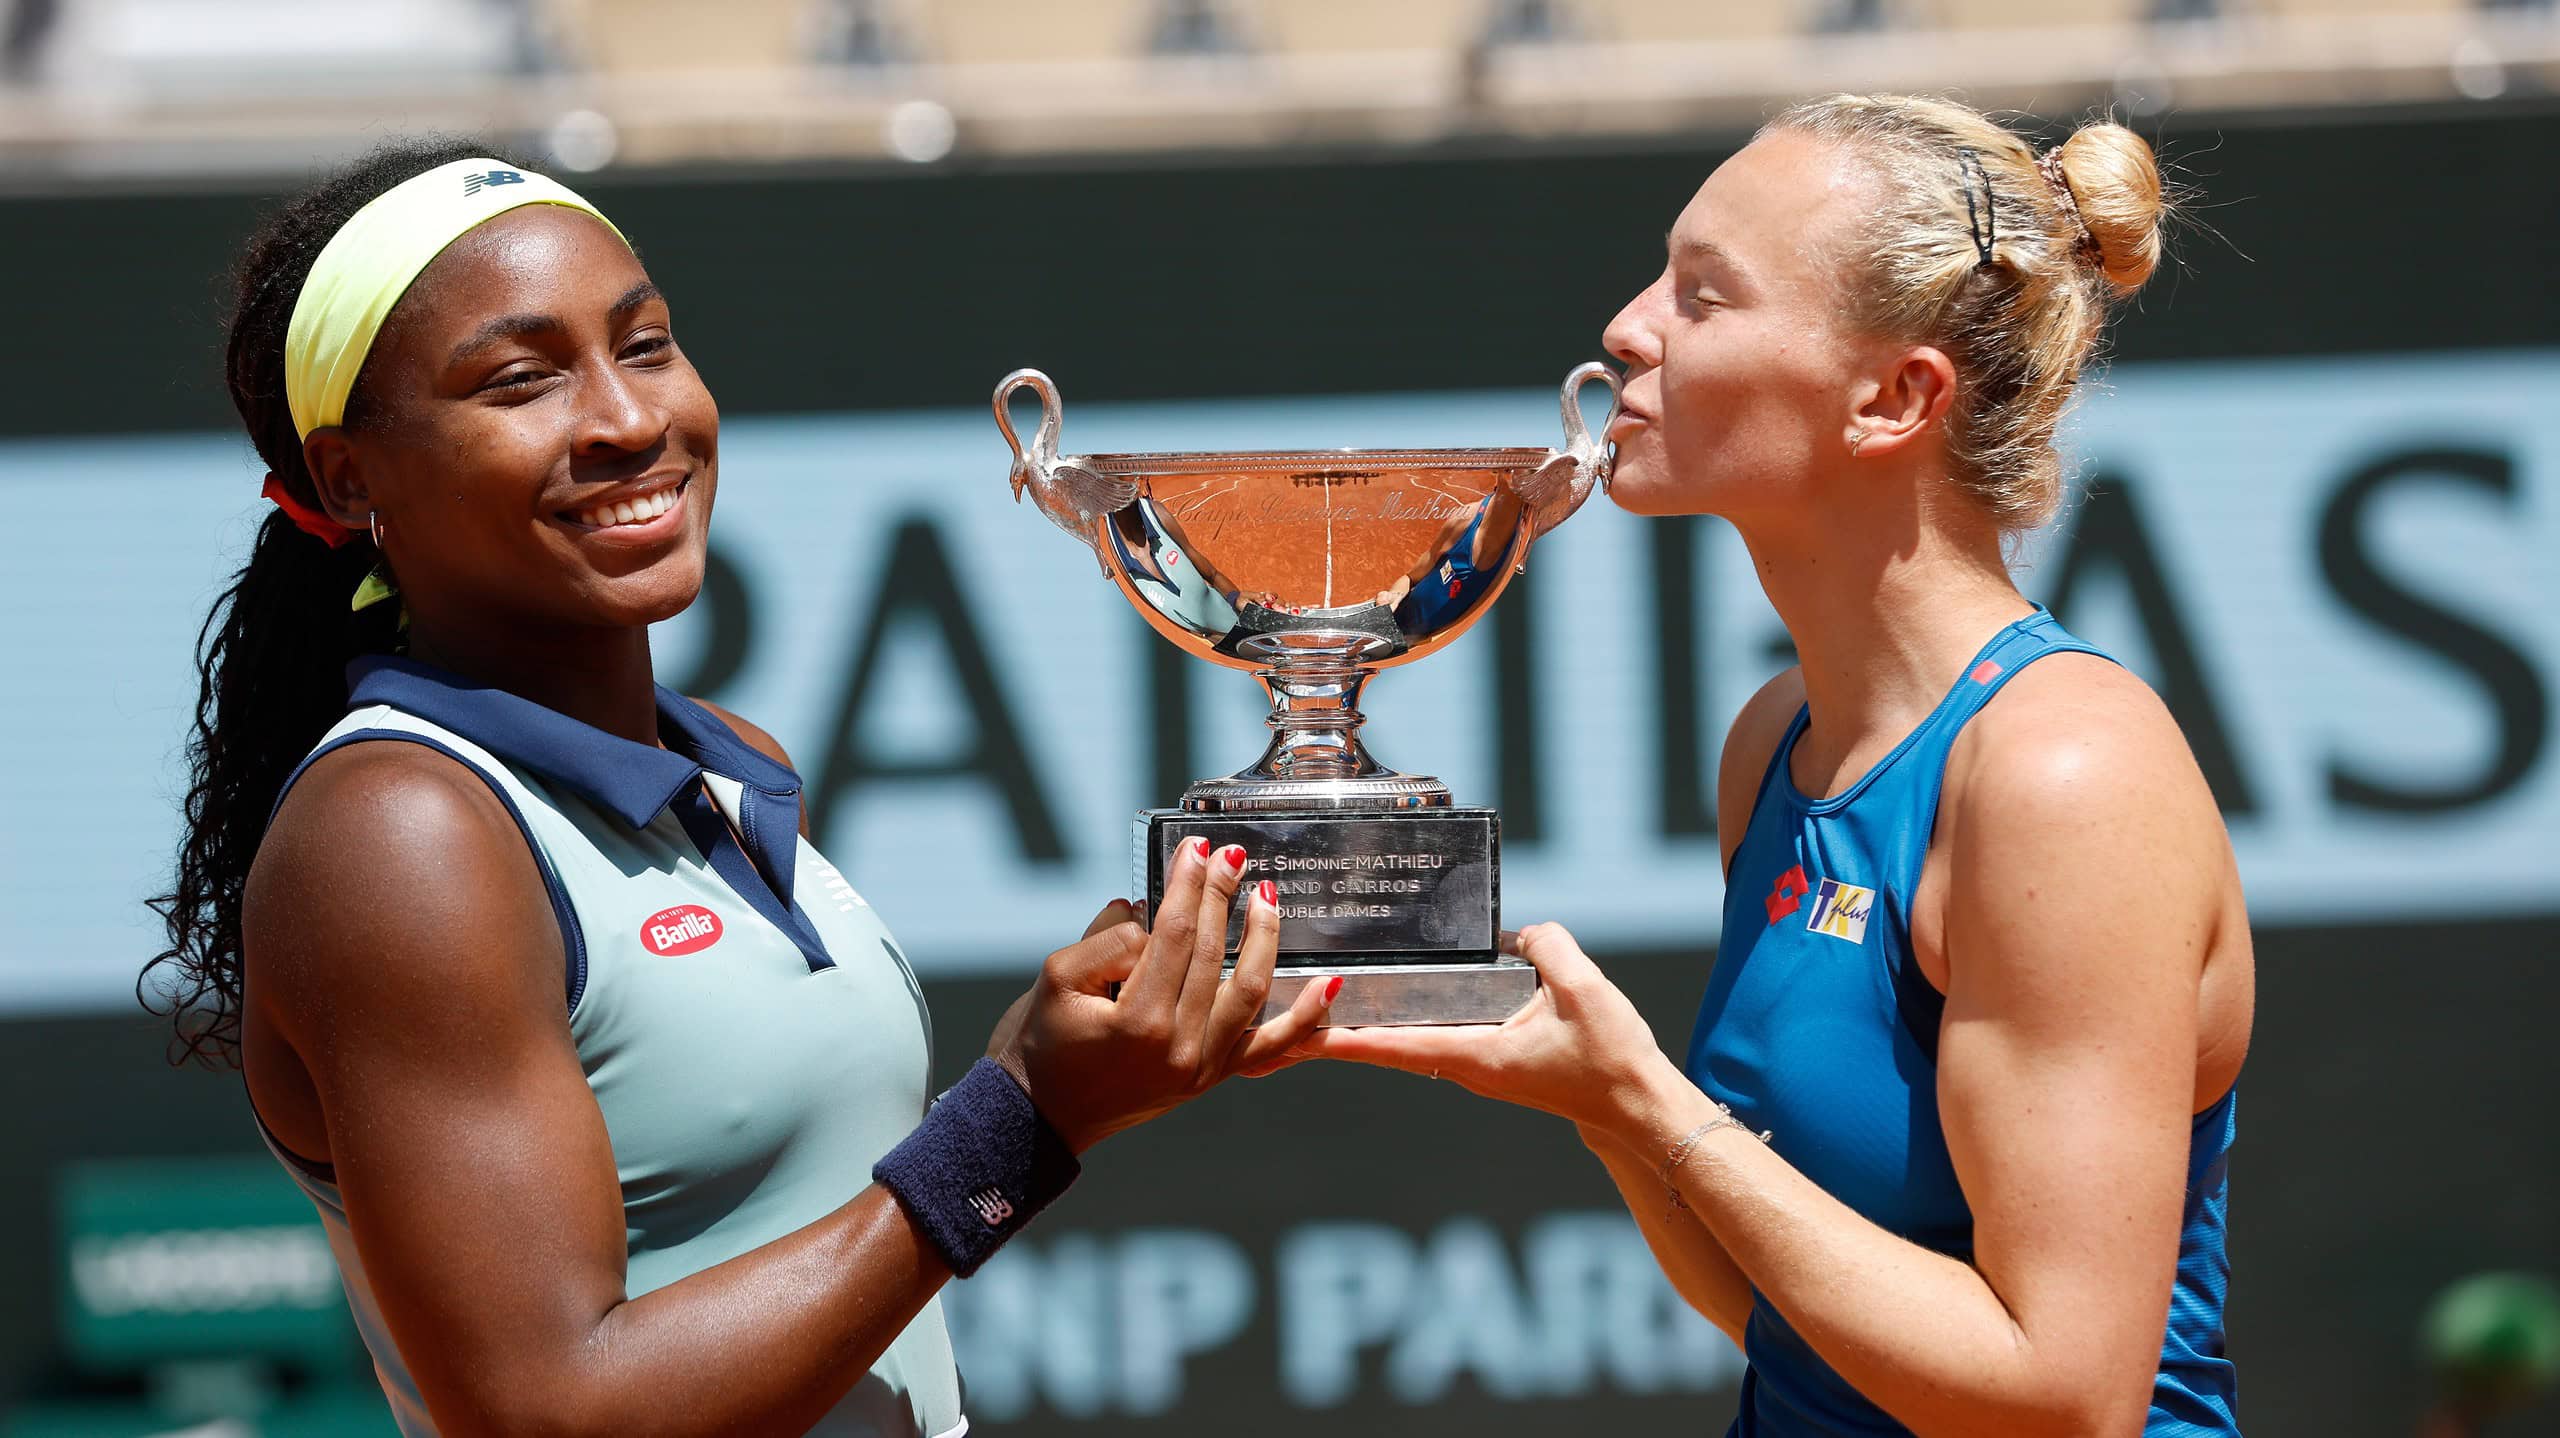 Coco Gauff Achieves Historic Grand Slam Wins in Singles and Doubles